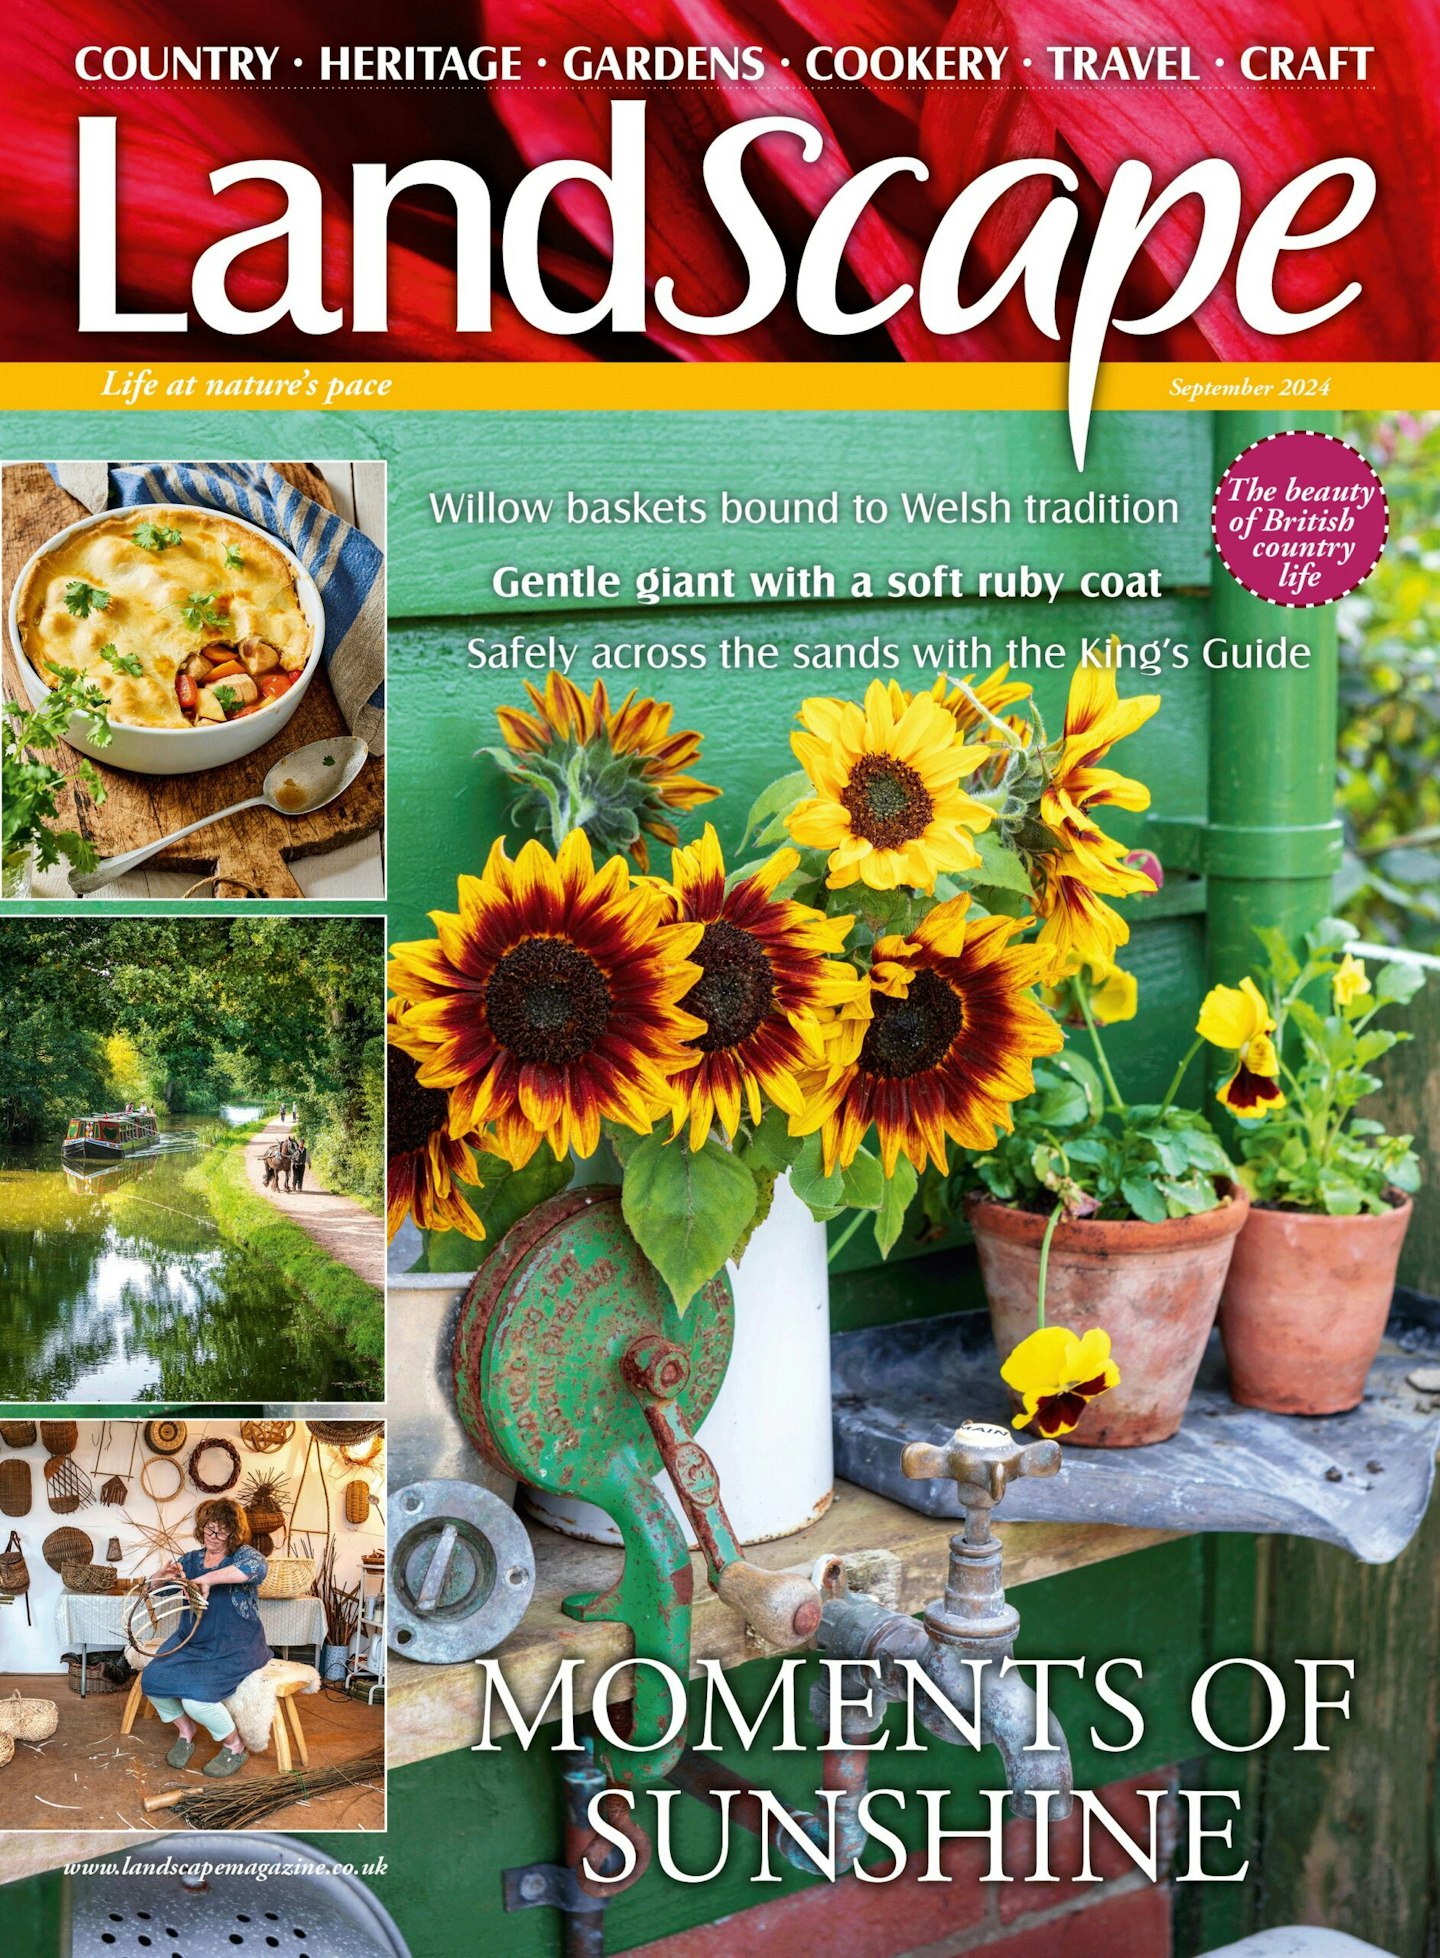 LAndScape in the September 2024 issue